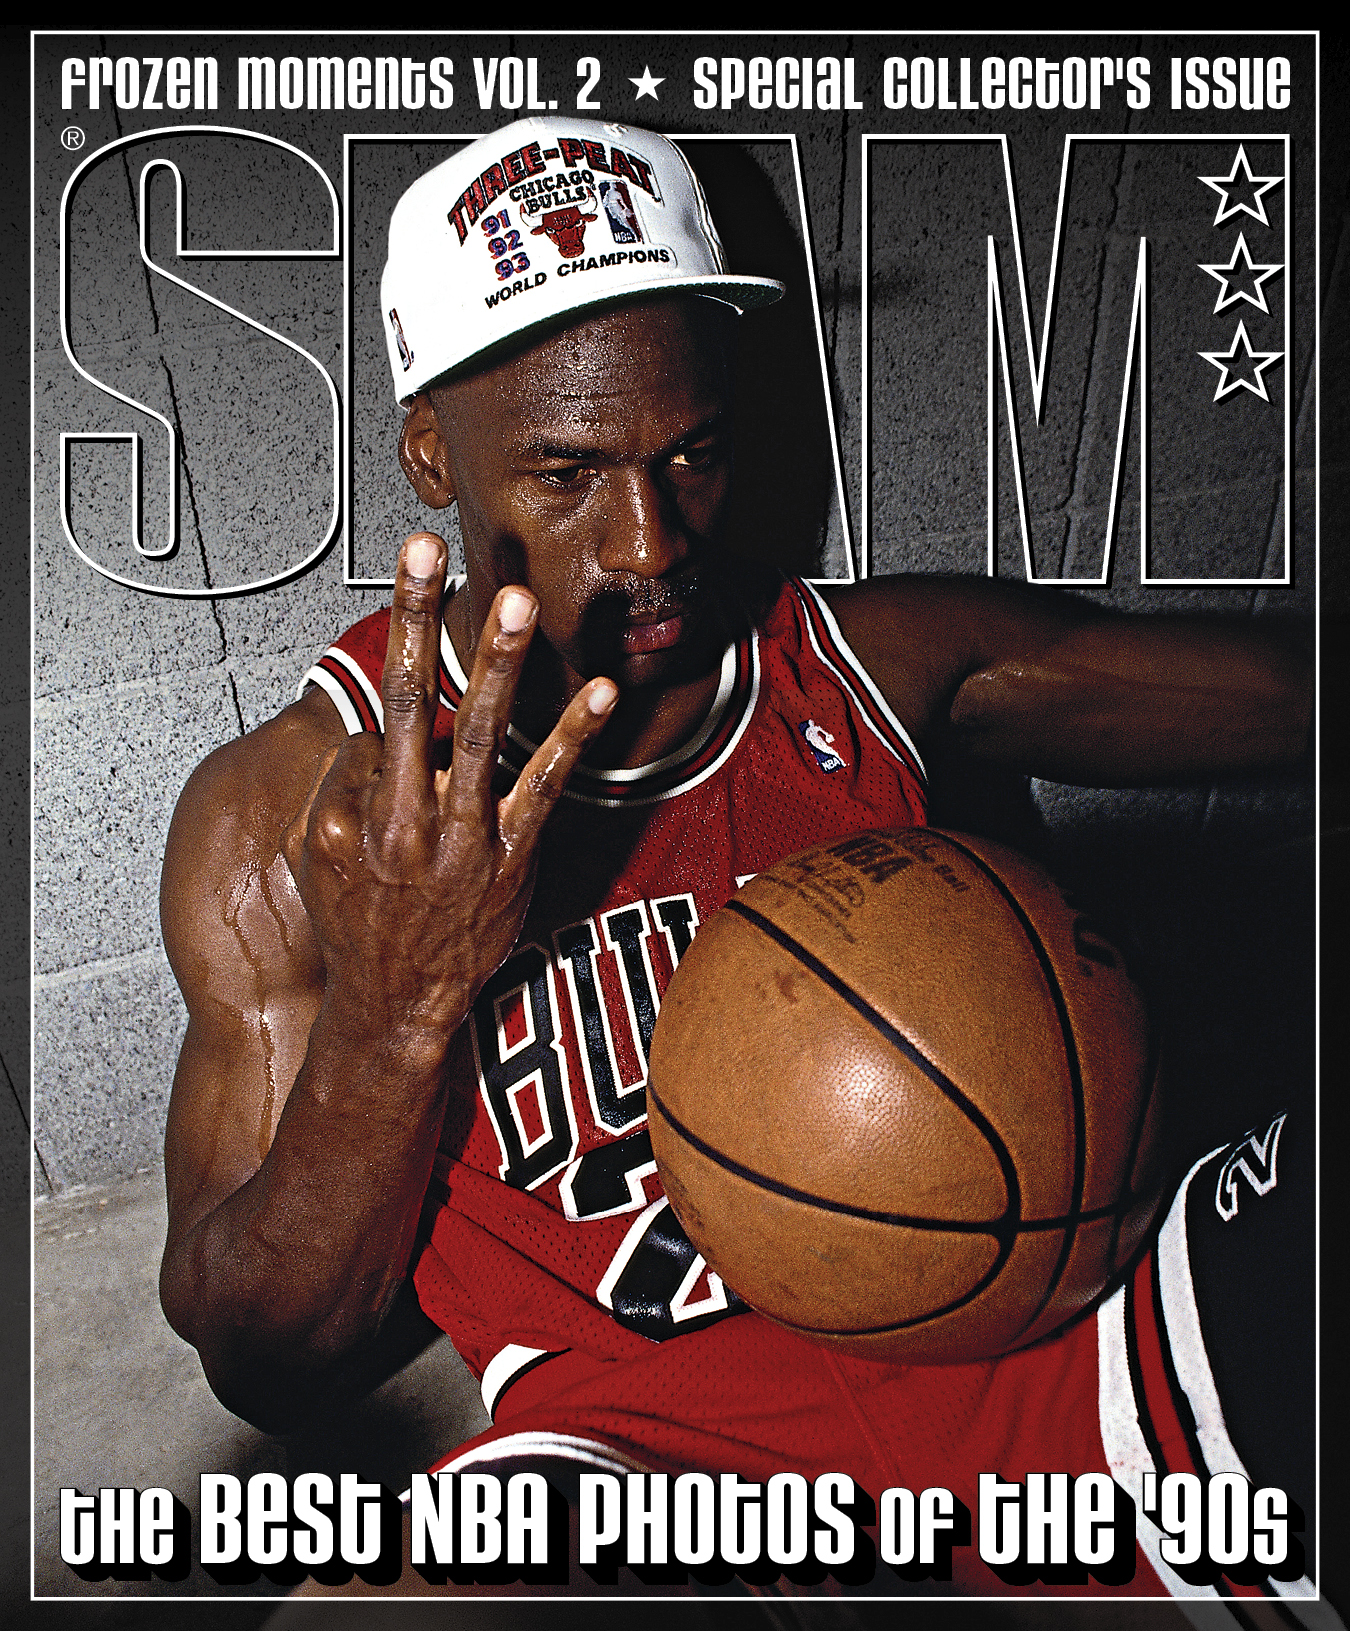 SLAM Presents The Best NBA Photos of the ’90s is OUT NOW!